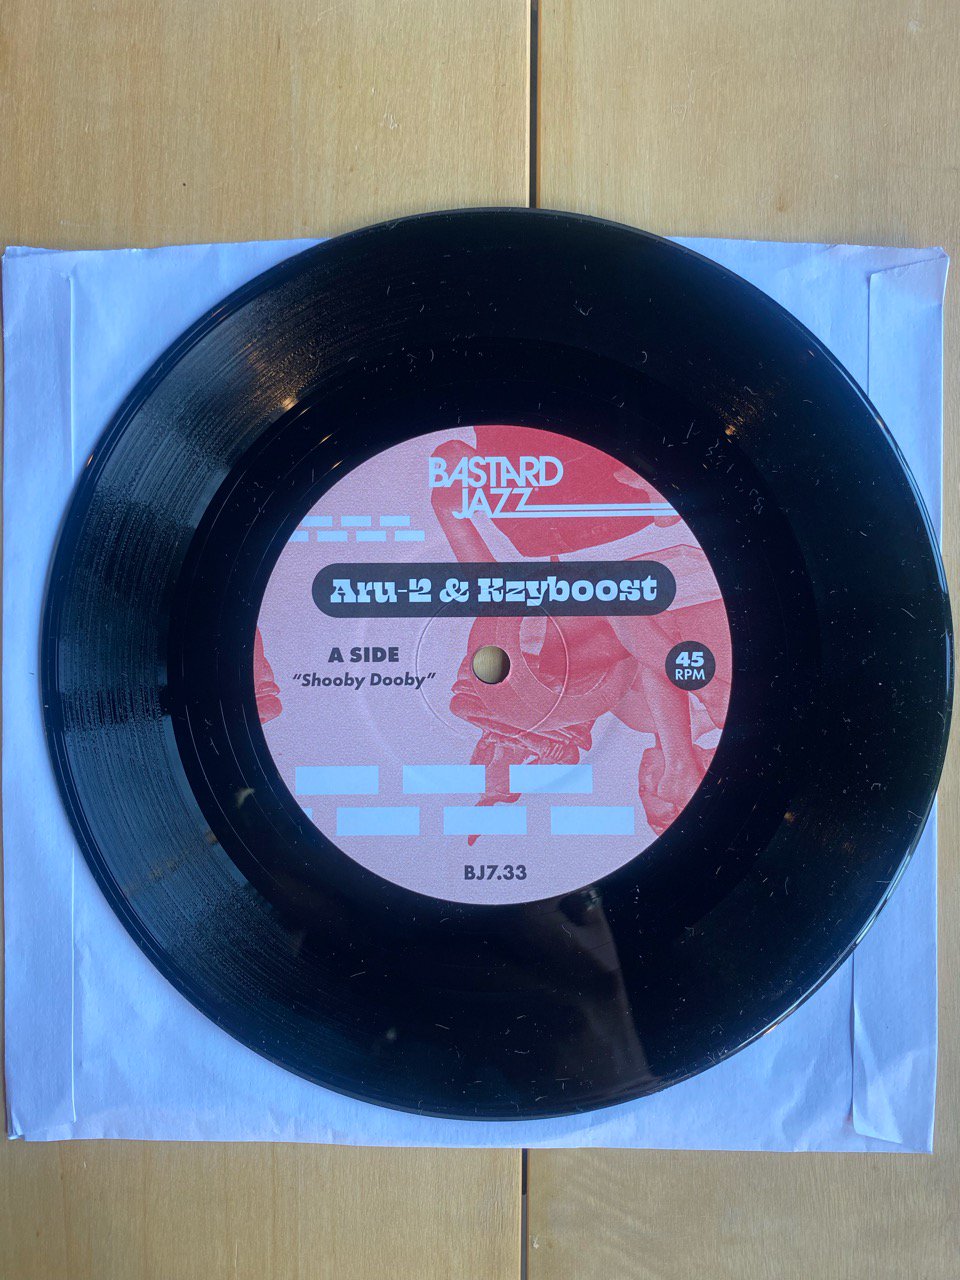 Aru-2 & Kzyboost / 7 inch (Hot Pantsから２曲） - LOSER ONLINE STORE